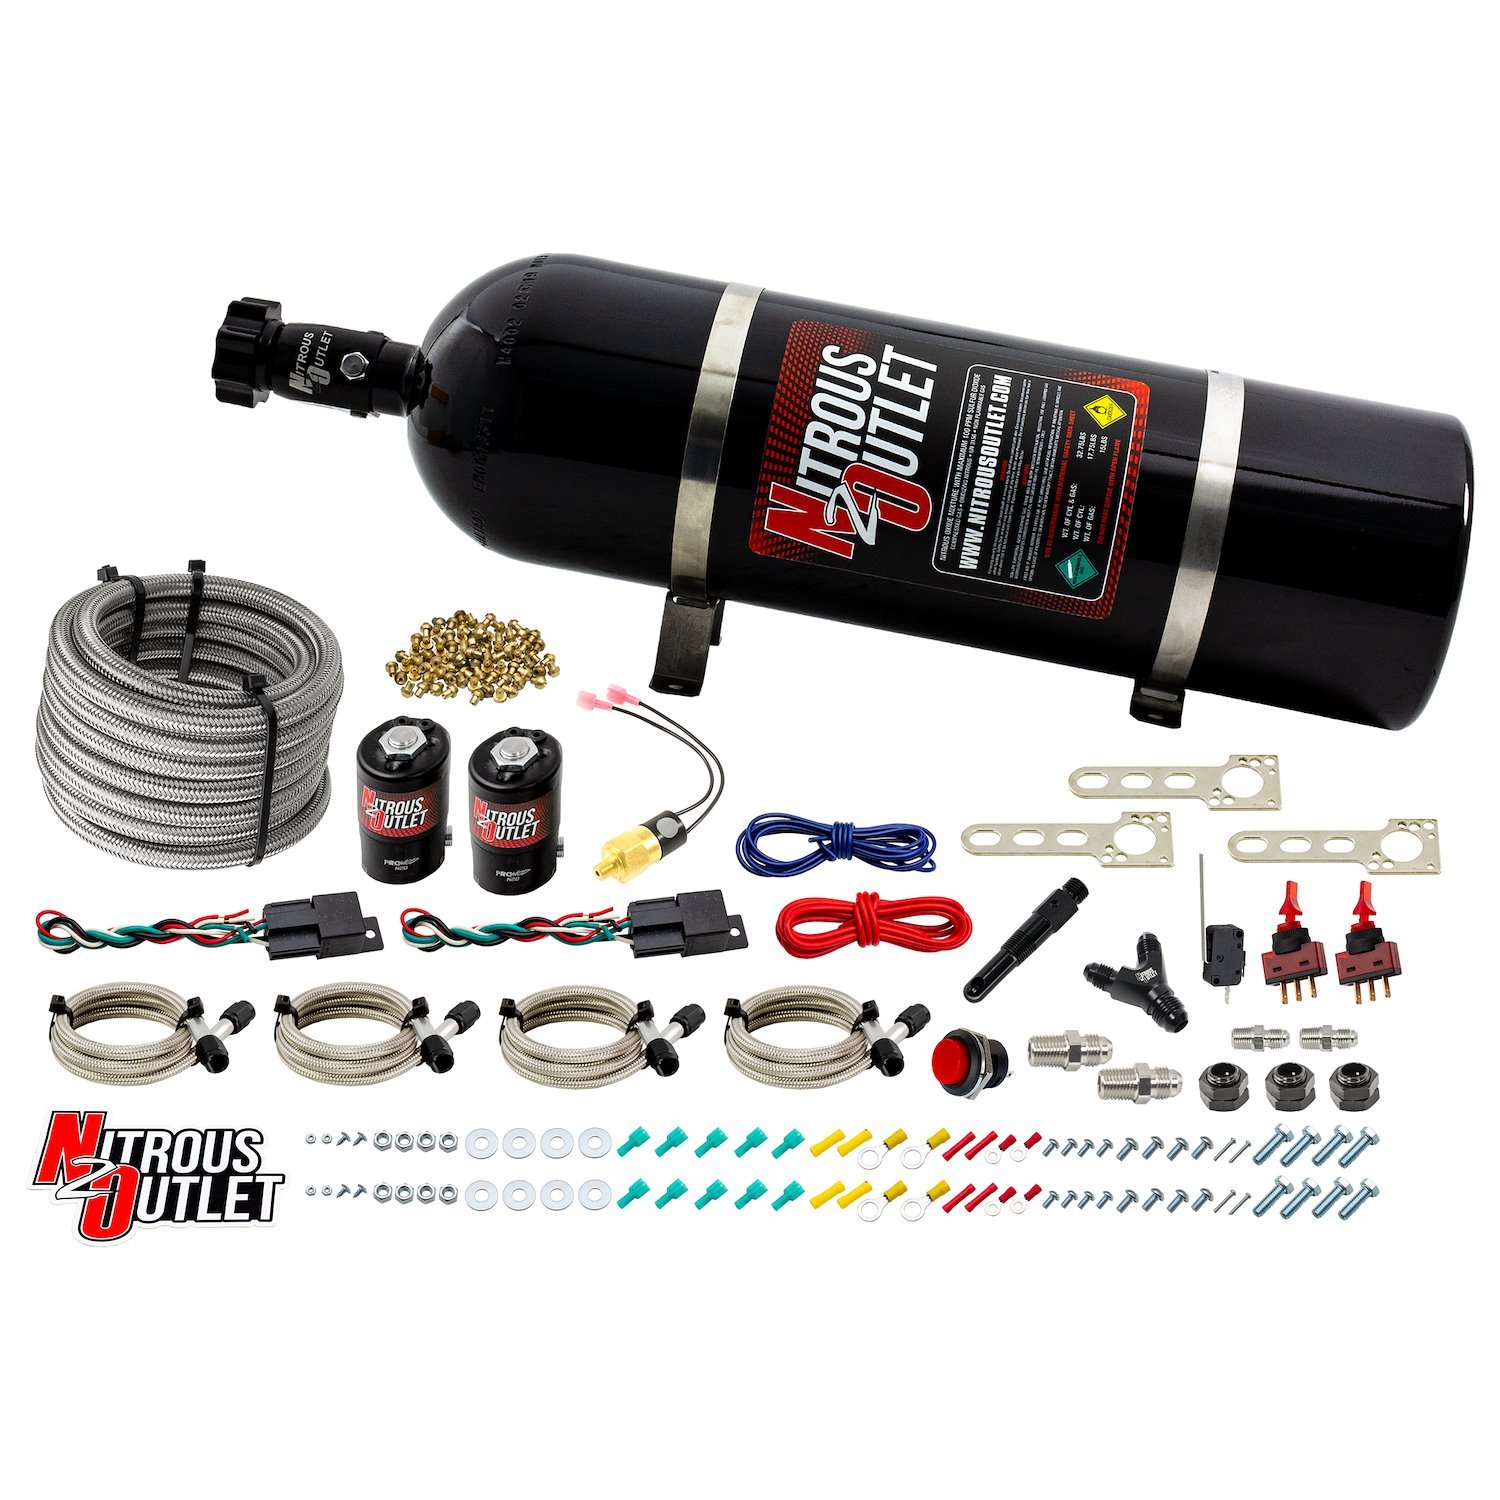 00-10251-15 Universal Diesel Dual-Stage Dry Single-Nozzle System, 35-200HP, 15lb Bottle